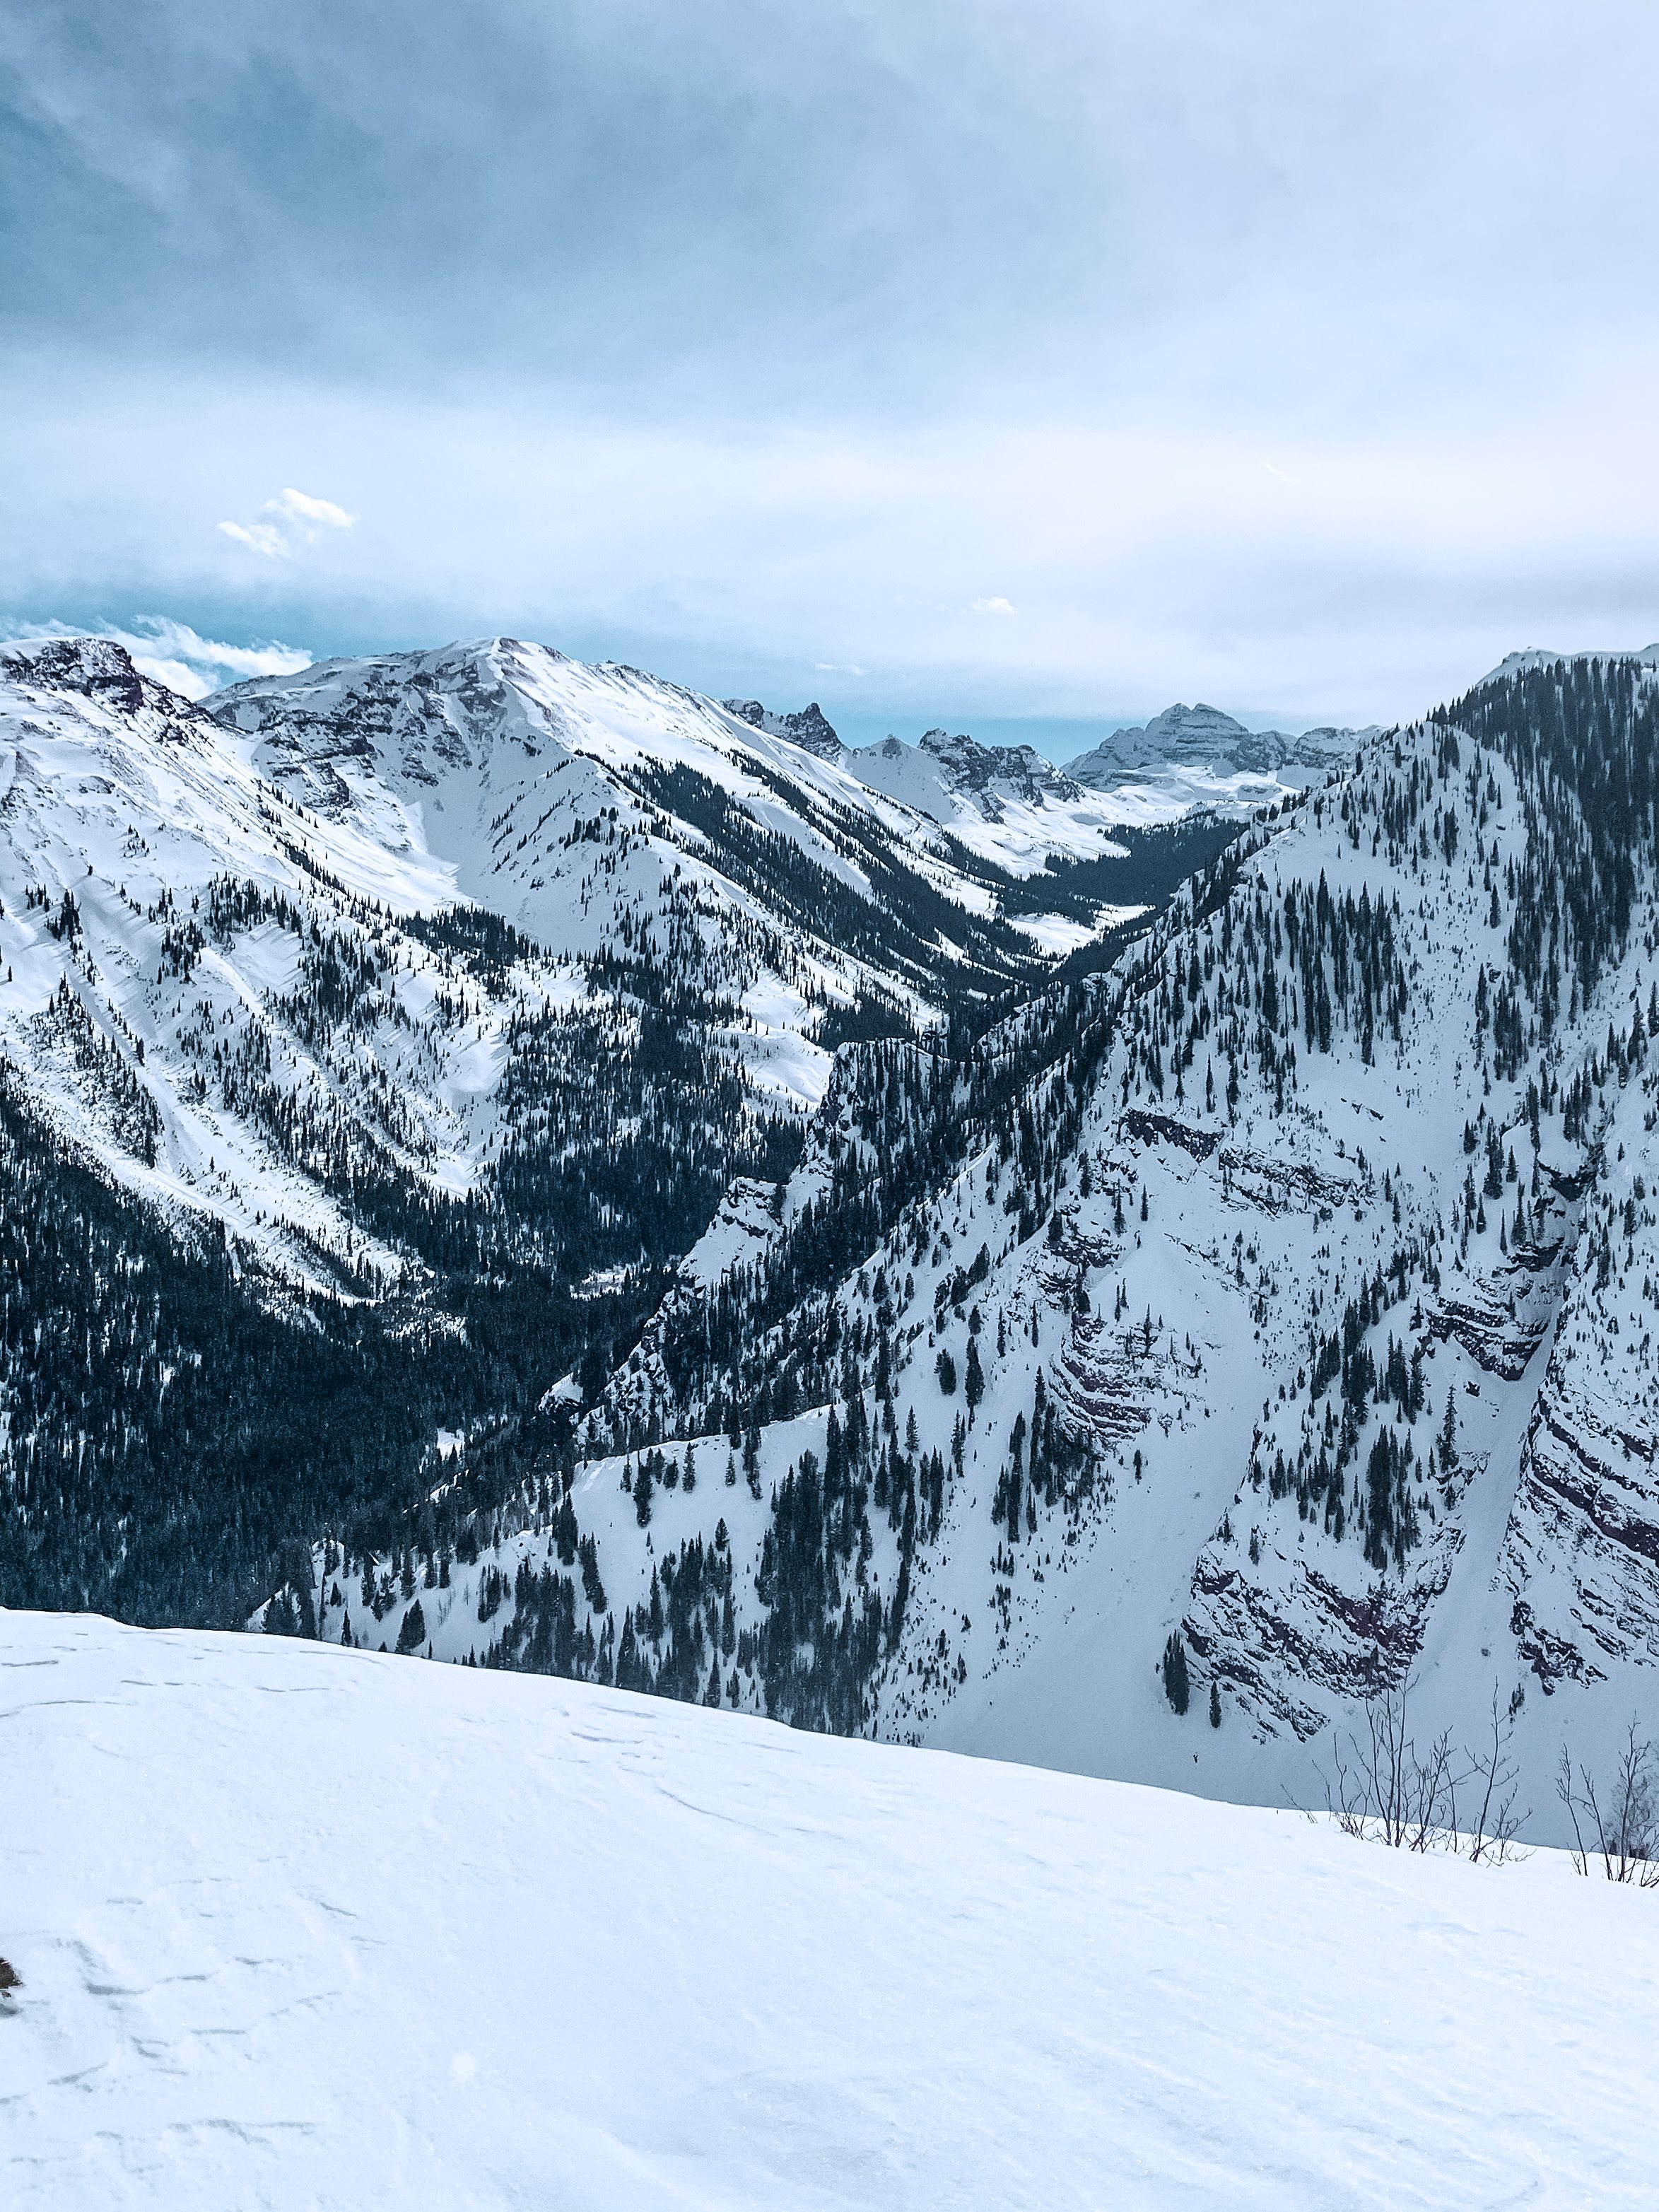 aspen mountain in winter high elevation view